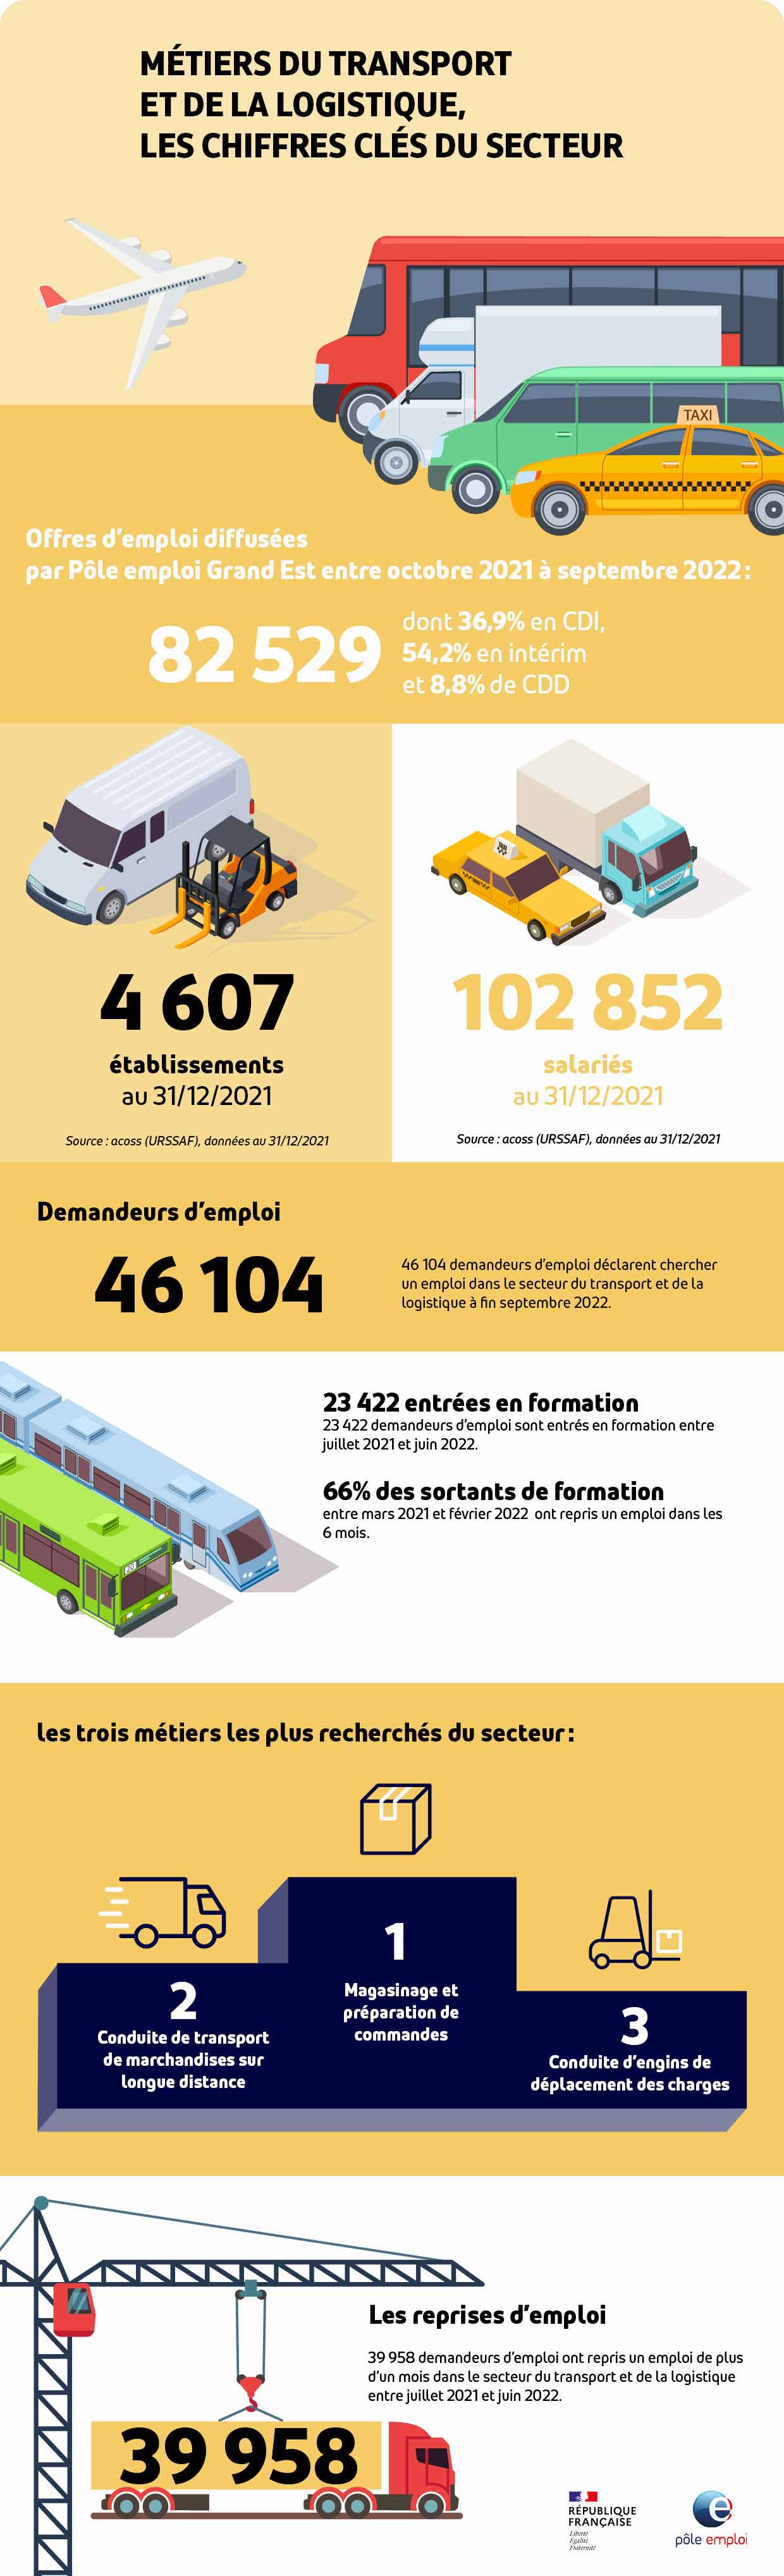 Infographie_transports_12-2022MOY.jpg